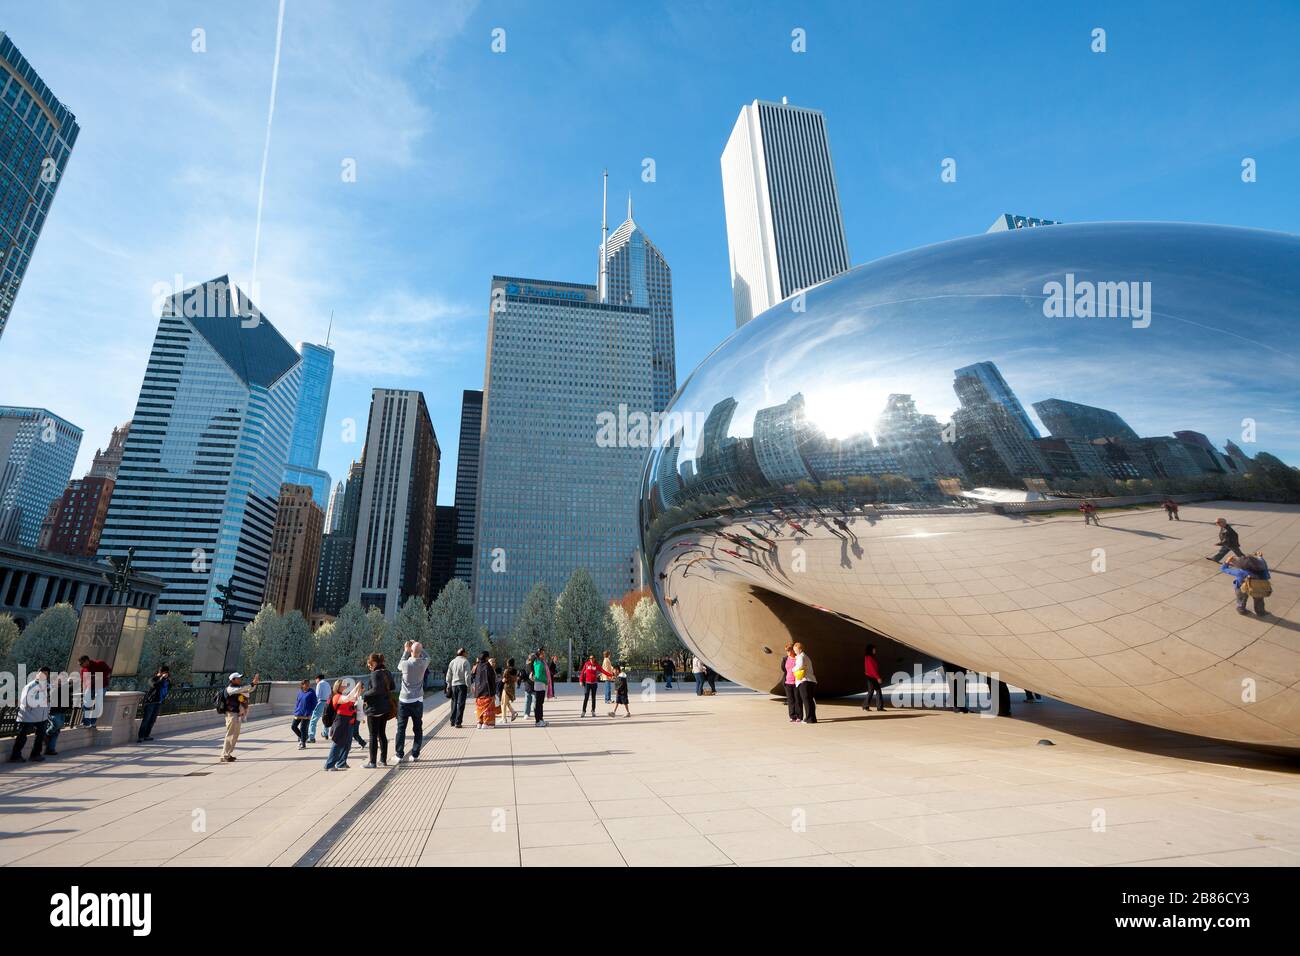 Chicago, Illinois, United States - Skyline of buildings and tourists at Millennium Park at downtown. Stock Photo